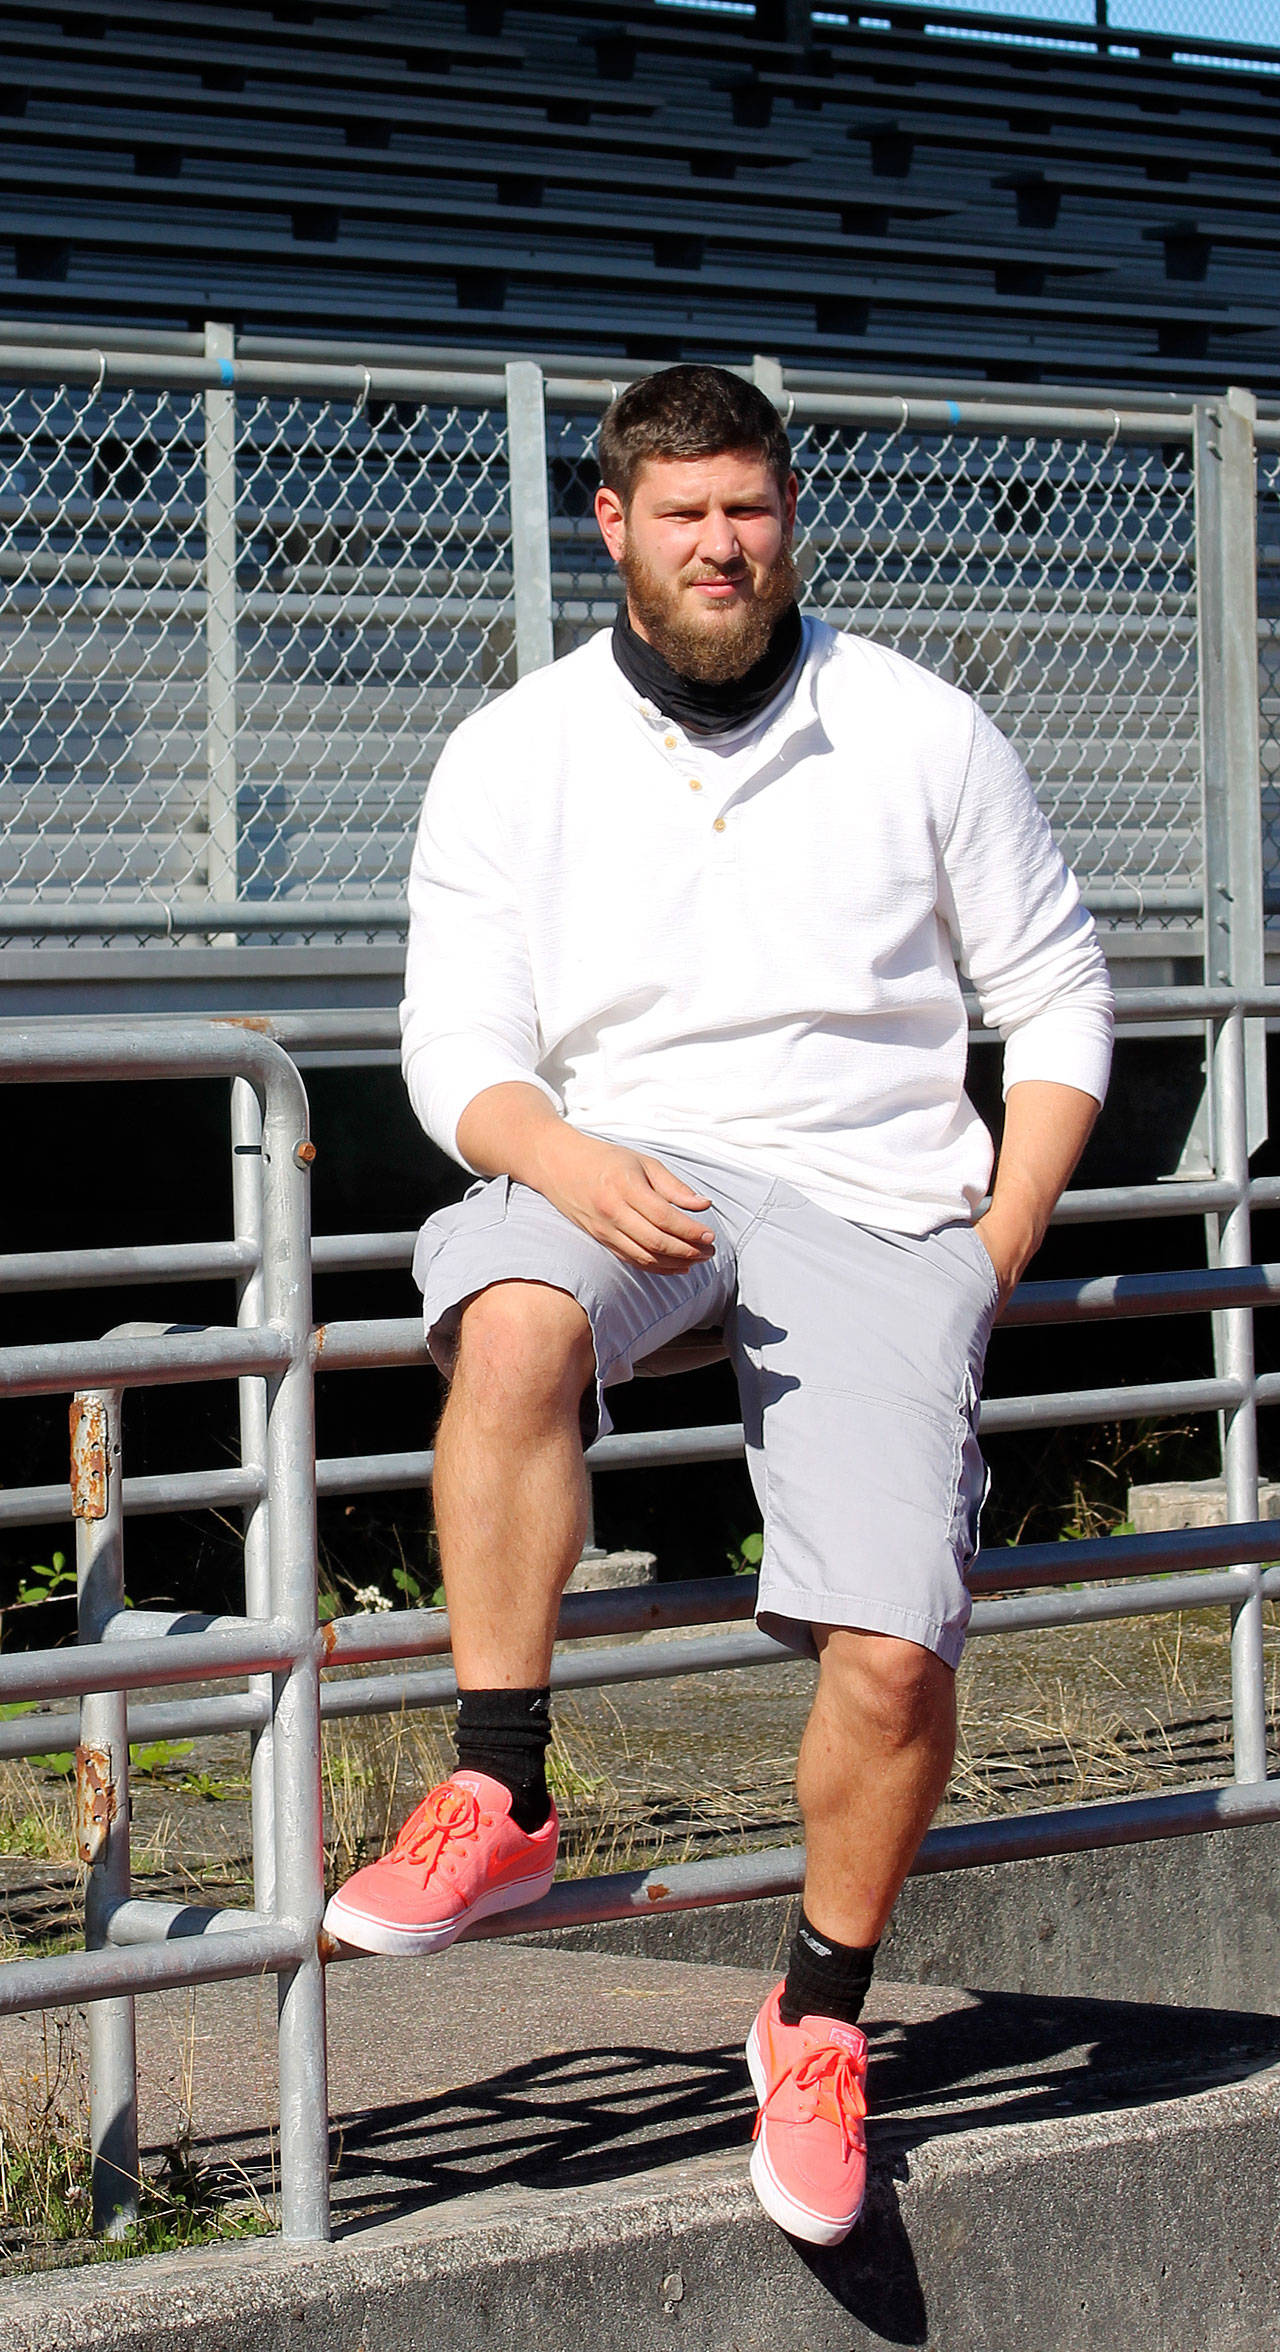 Luke Hodson is the new football coach at South Whidbey High School. (Photo by Jim Waller/Whidbey News Group)